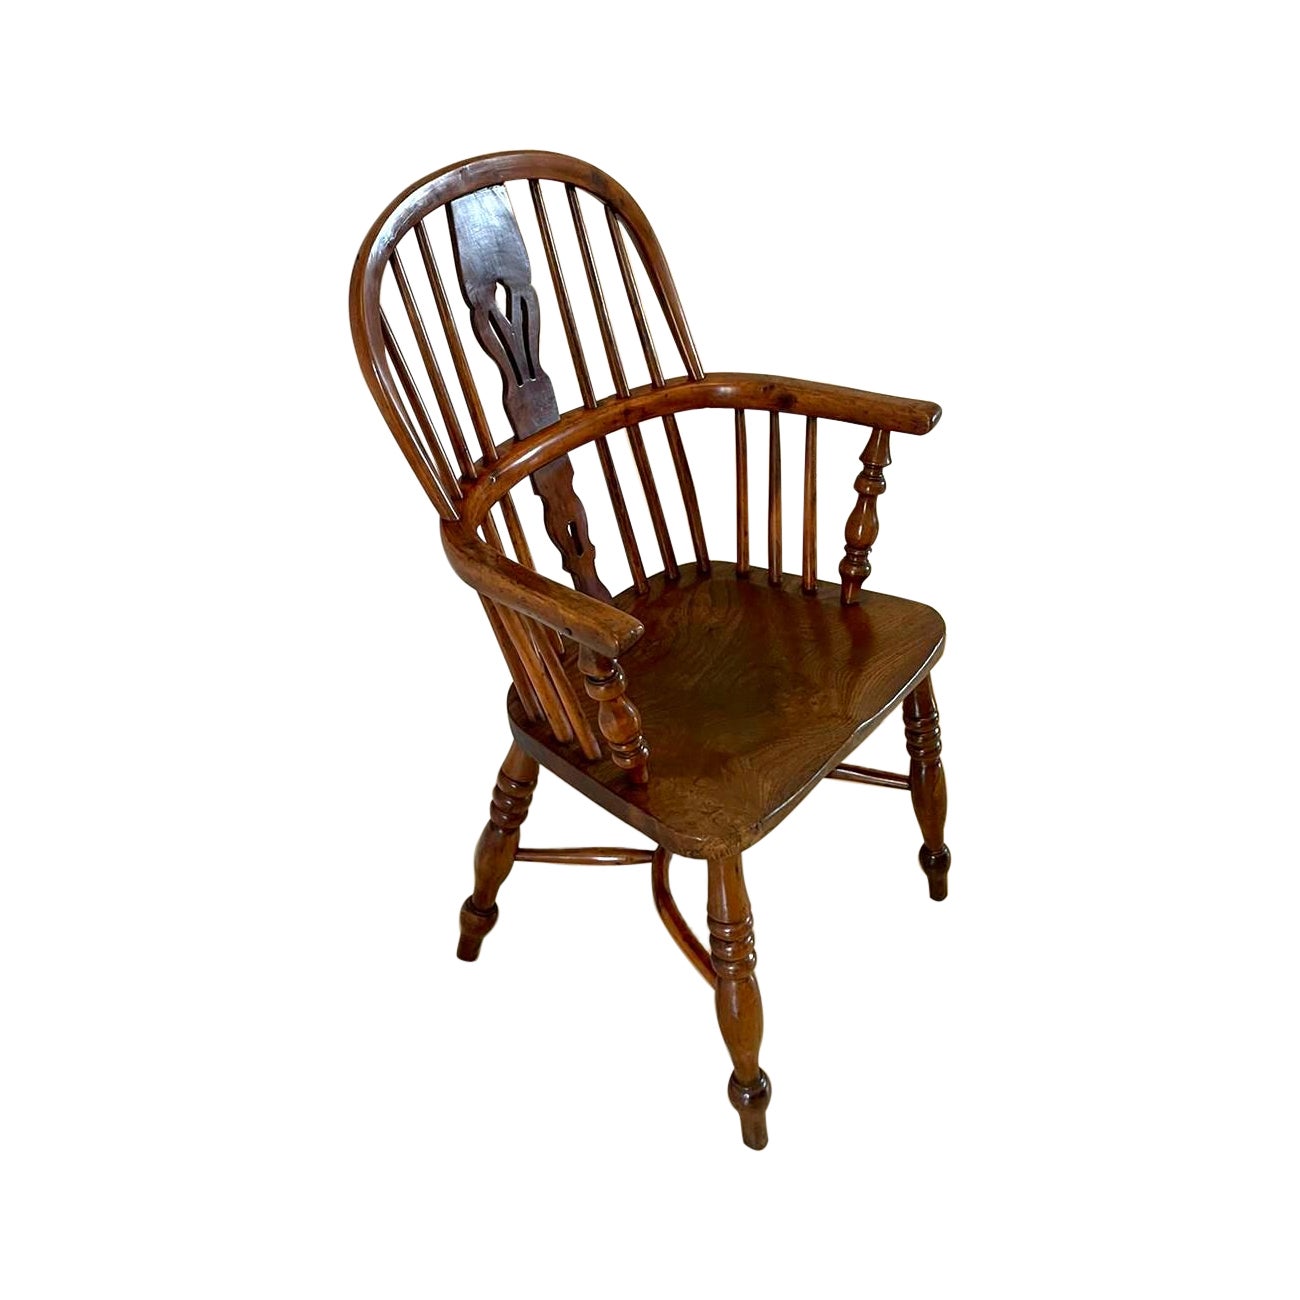  Antique George III Quality Child’s Yew Wood Windsor Chair